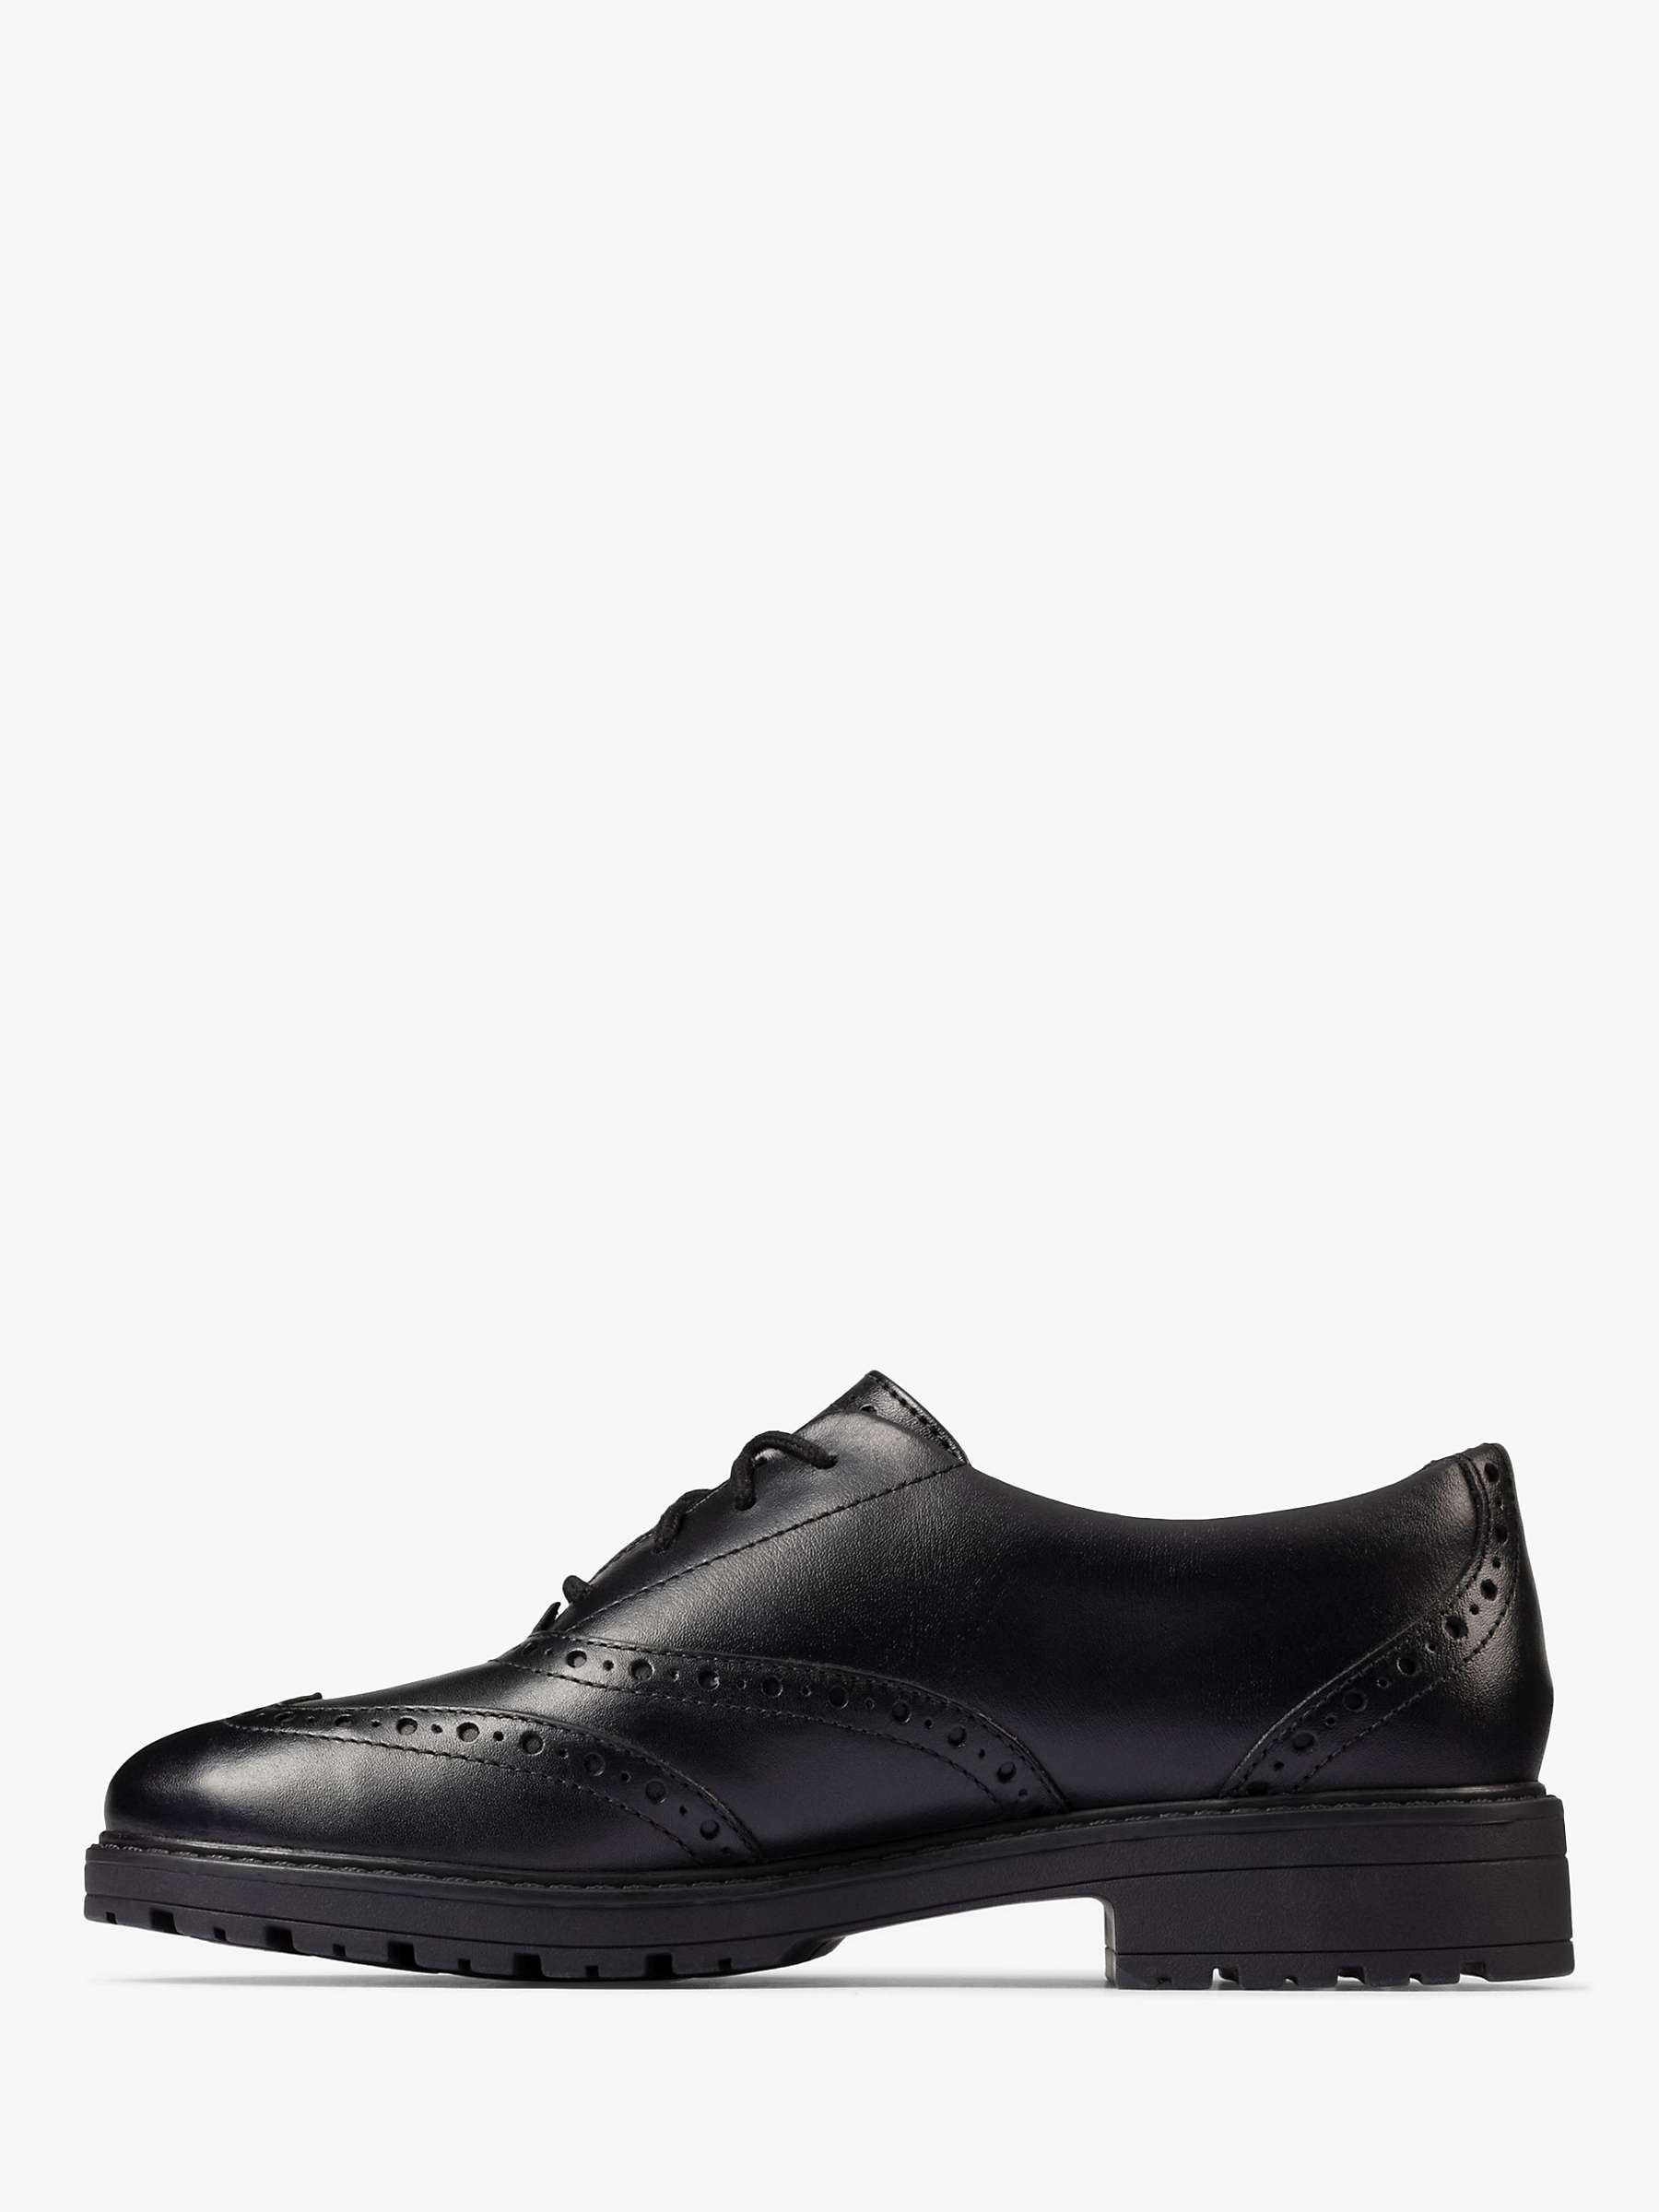 Clarks Boys Lace Up Formal Shoes Loxham Derby 